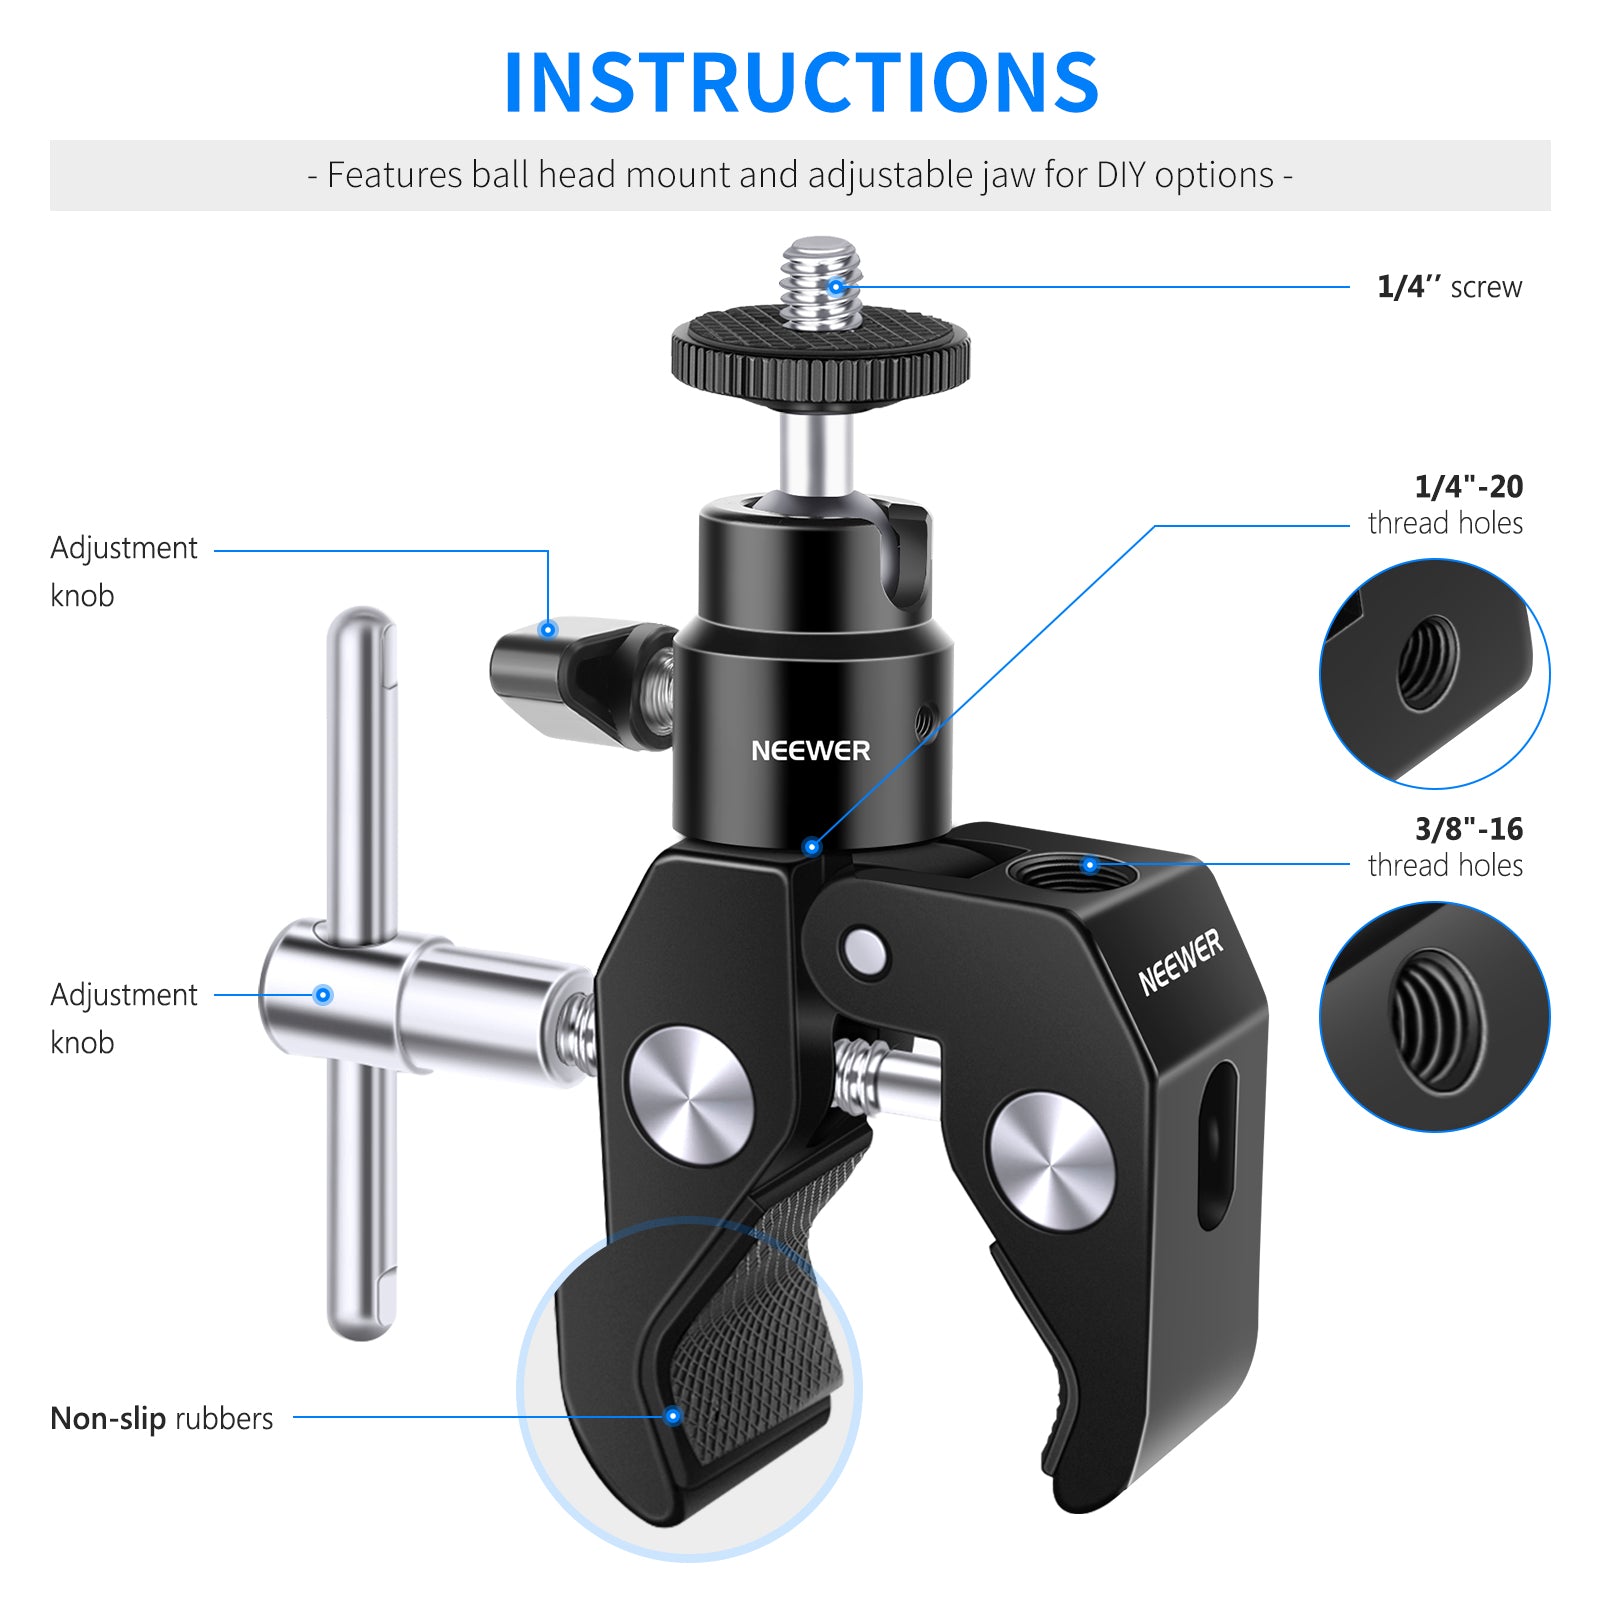 Neewer Upgraded Super Clamp with Mini Ball Head Mount